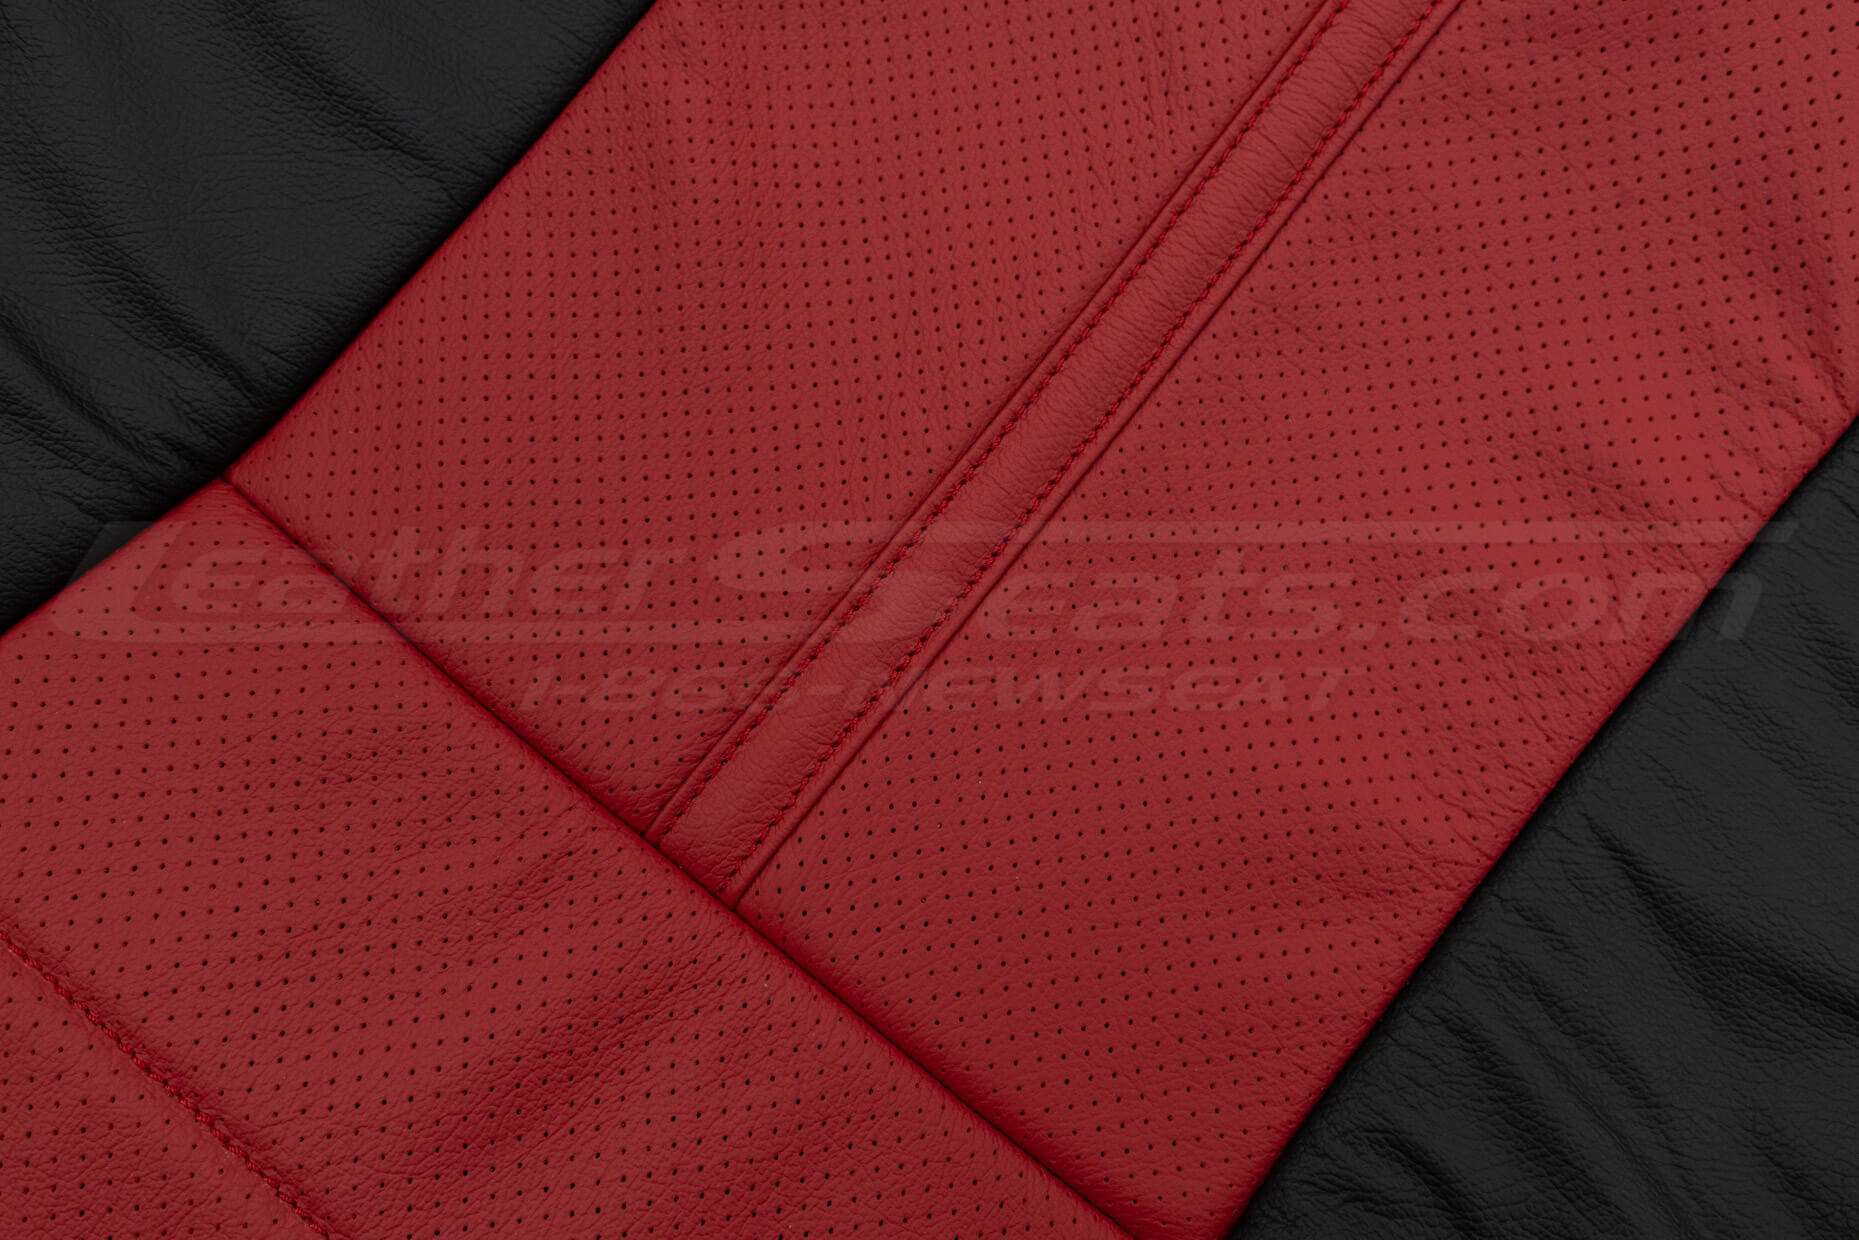 Perforated Red Body close-up